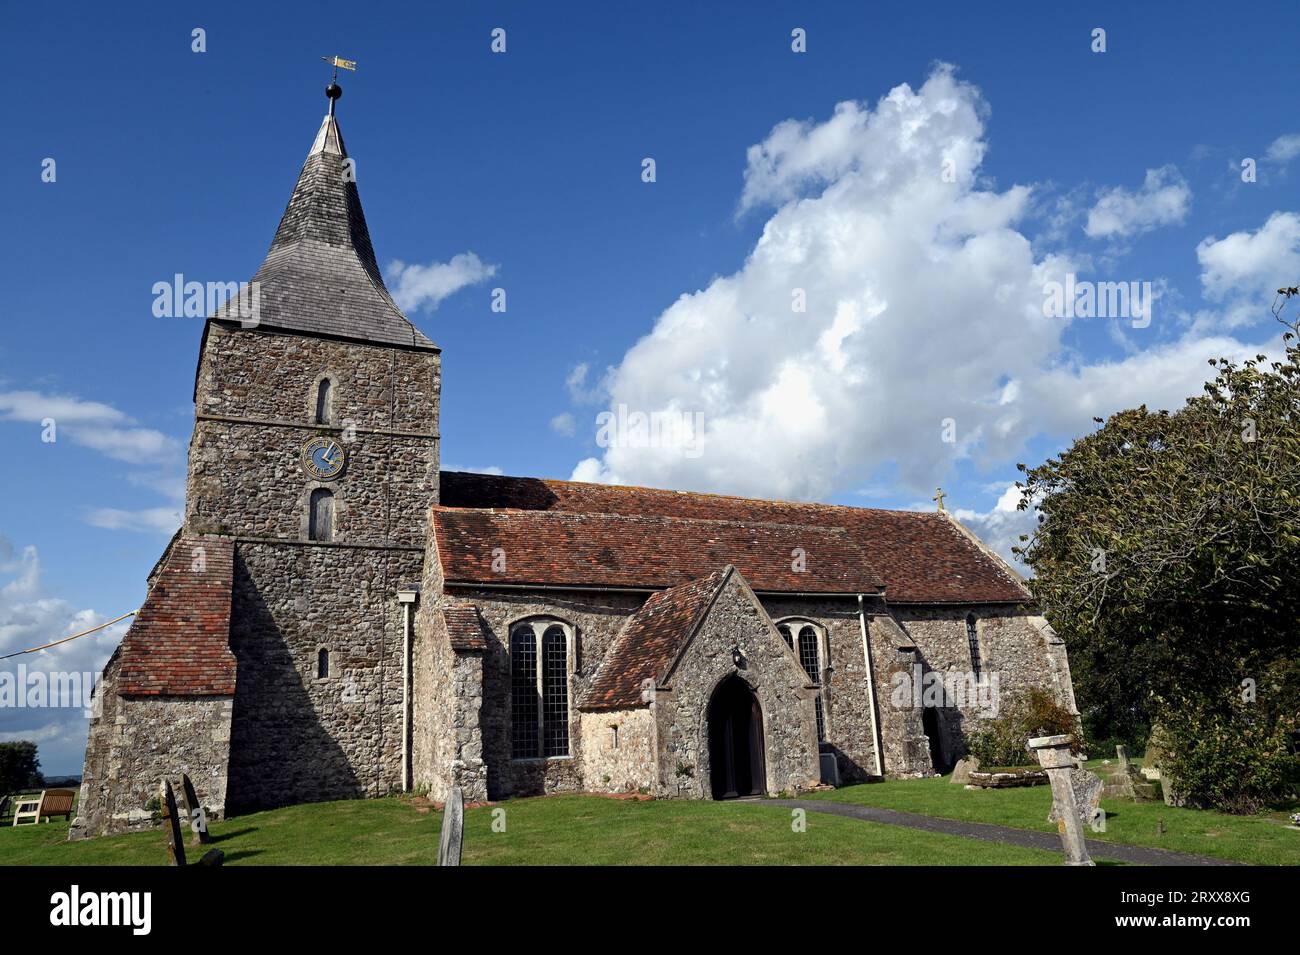 The church of St Mary the Virgin, St Mary in the Marsh, Romney Marsh, Kent. E Nisbet, the children's author, is buried and commemorated there. Stock Photo